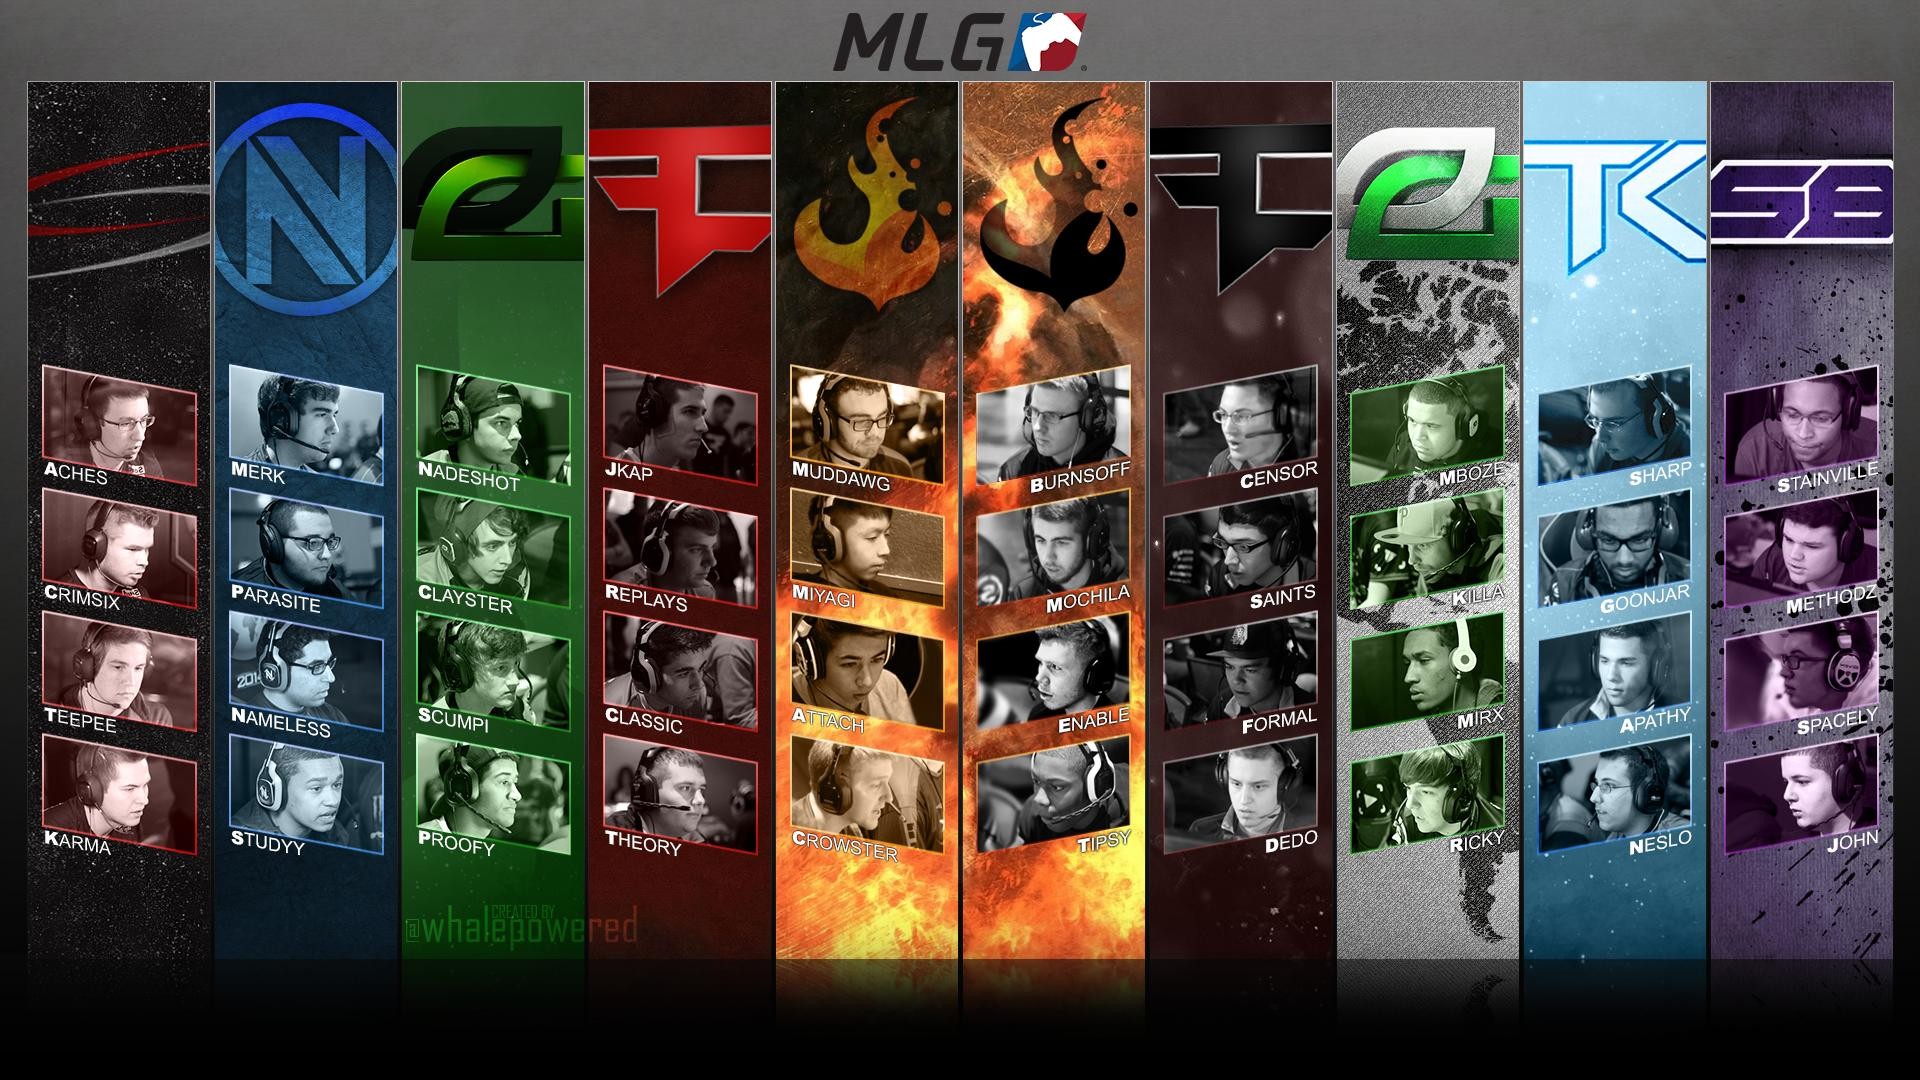 1920x1080 Optic gaming backgrounds.